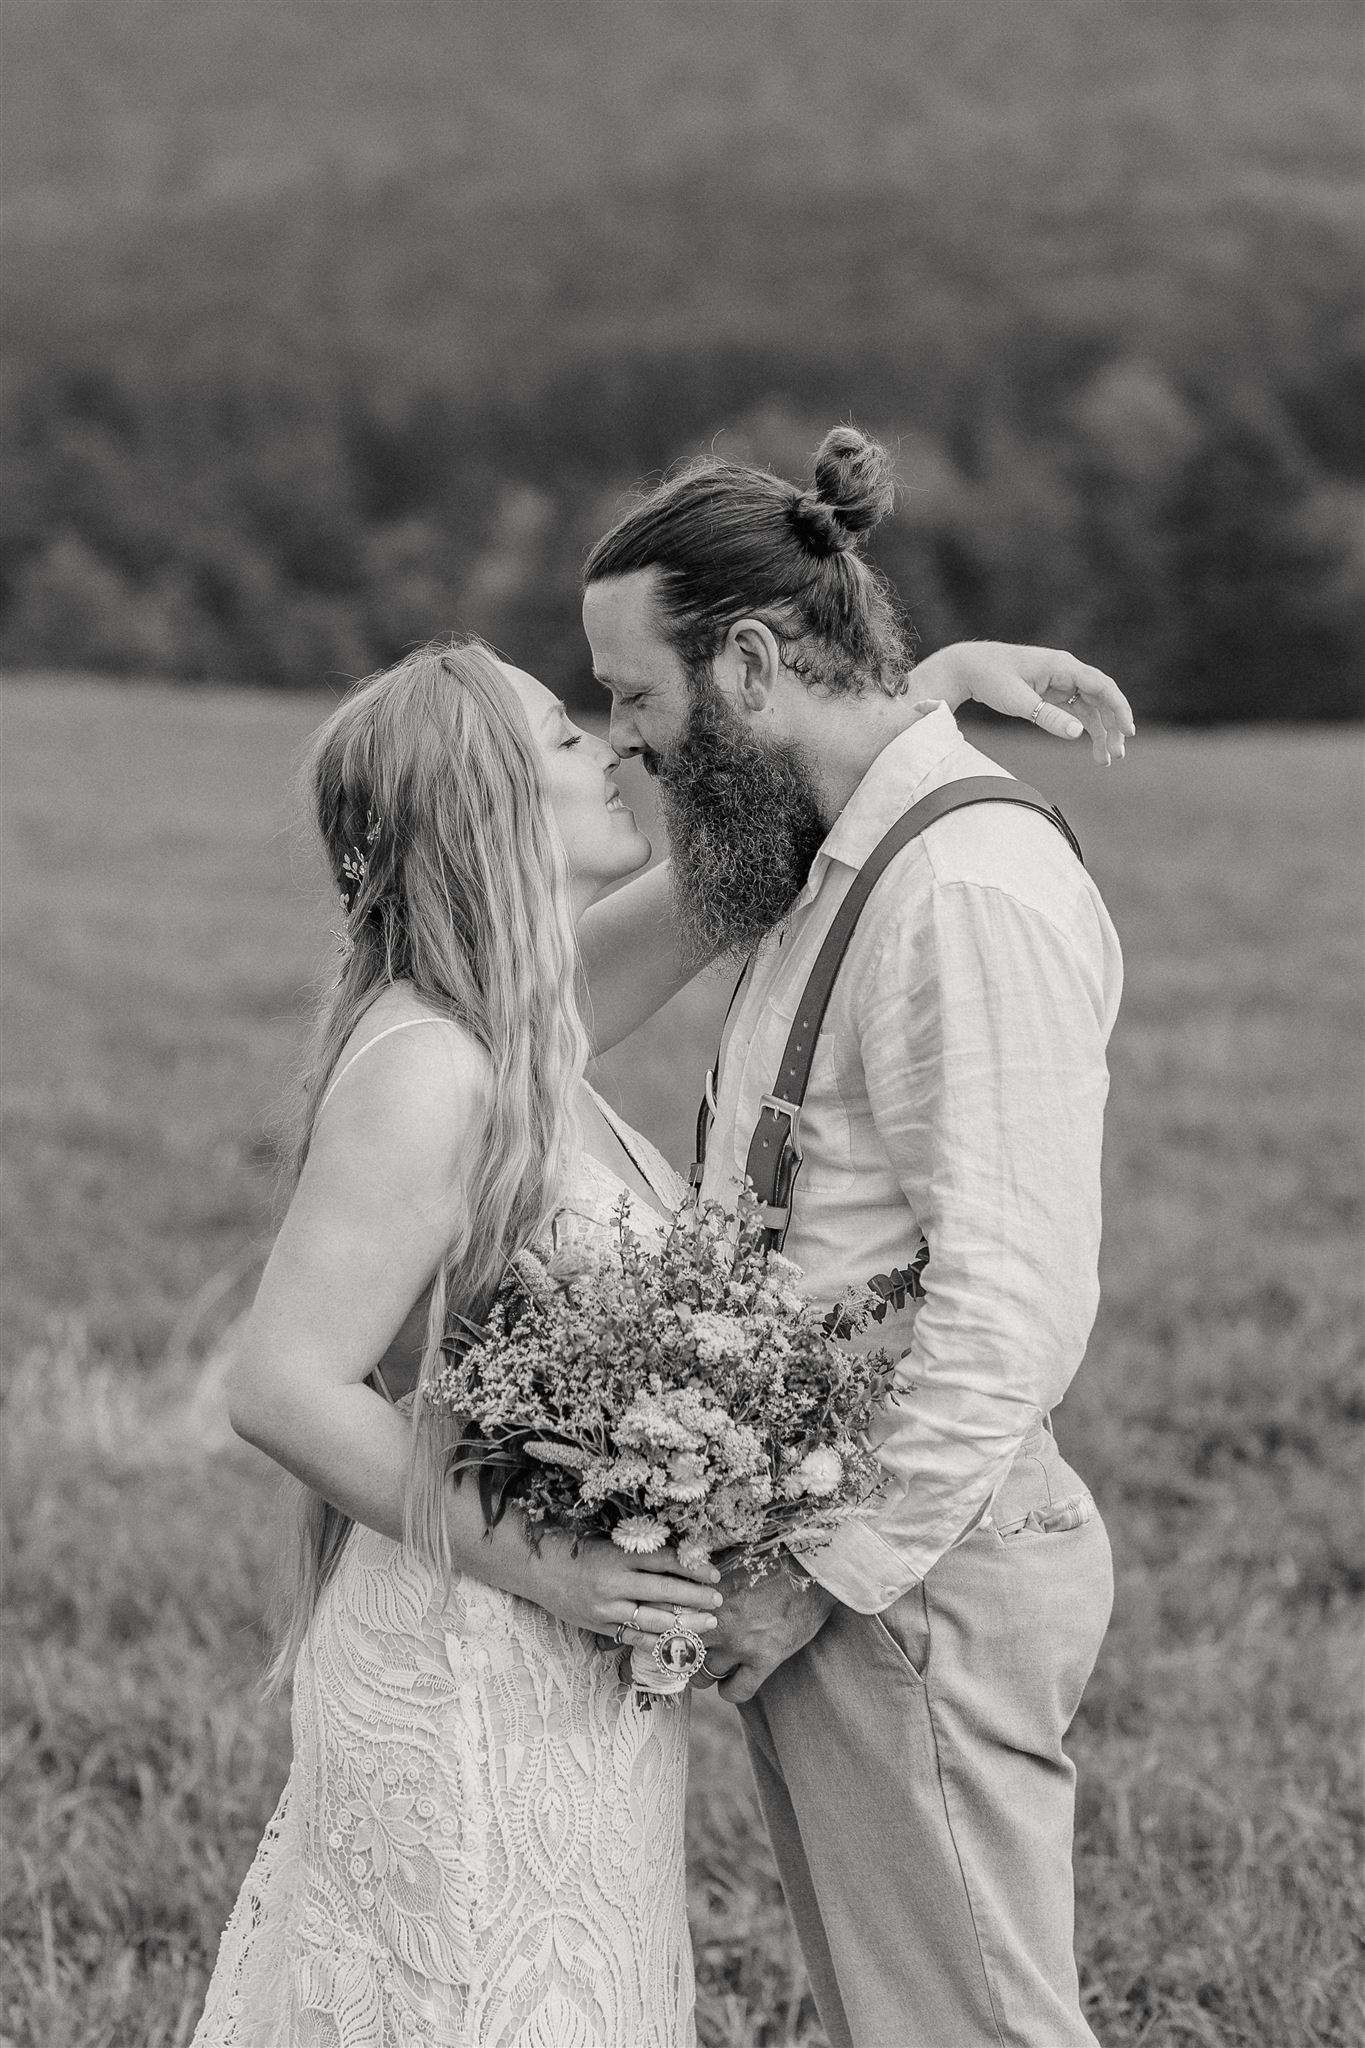 Laura And Mike Host A Heartfelt Farmhouse Wedding In Vermont.